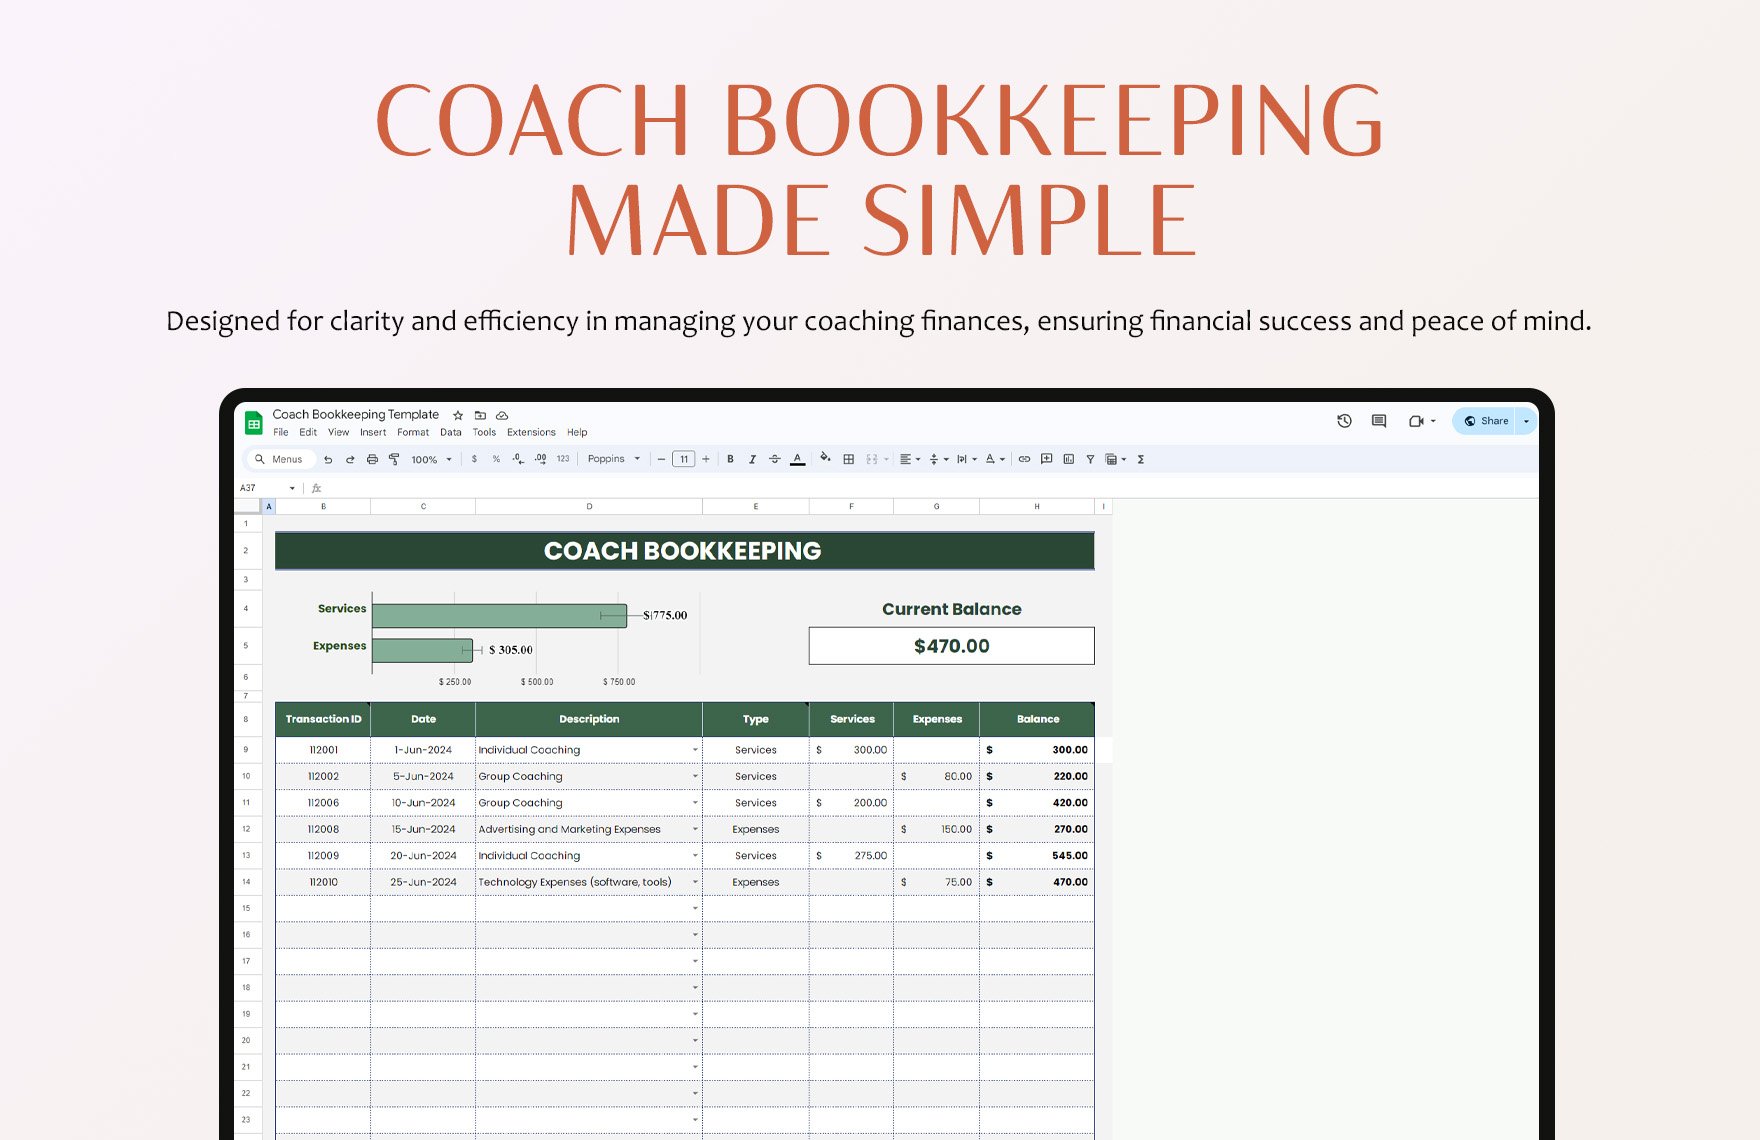 Coach Bookkeeping Template